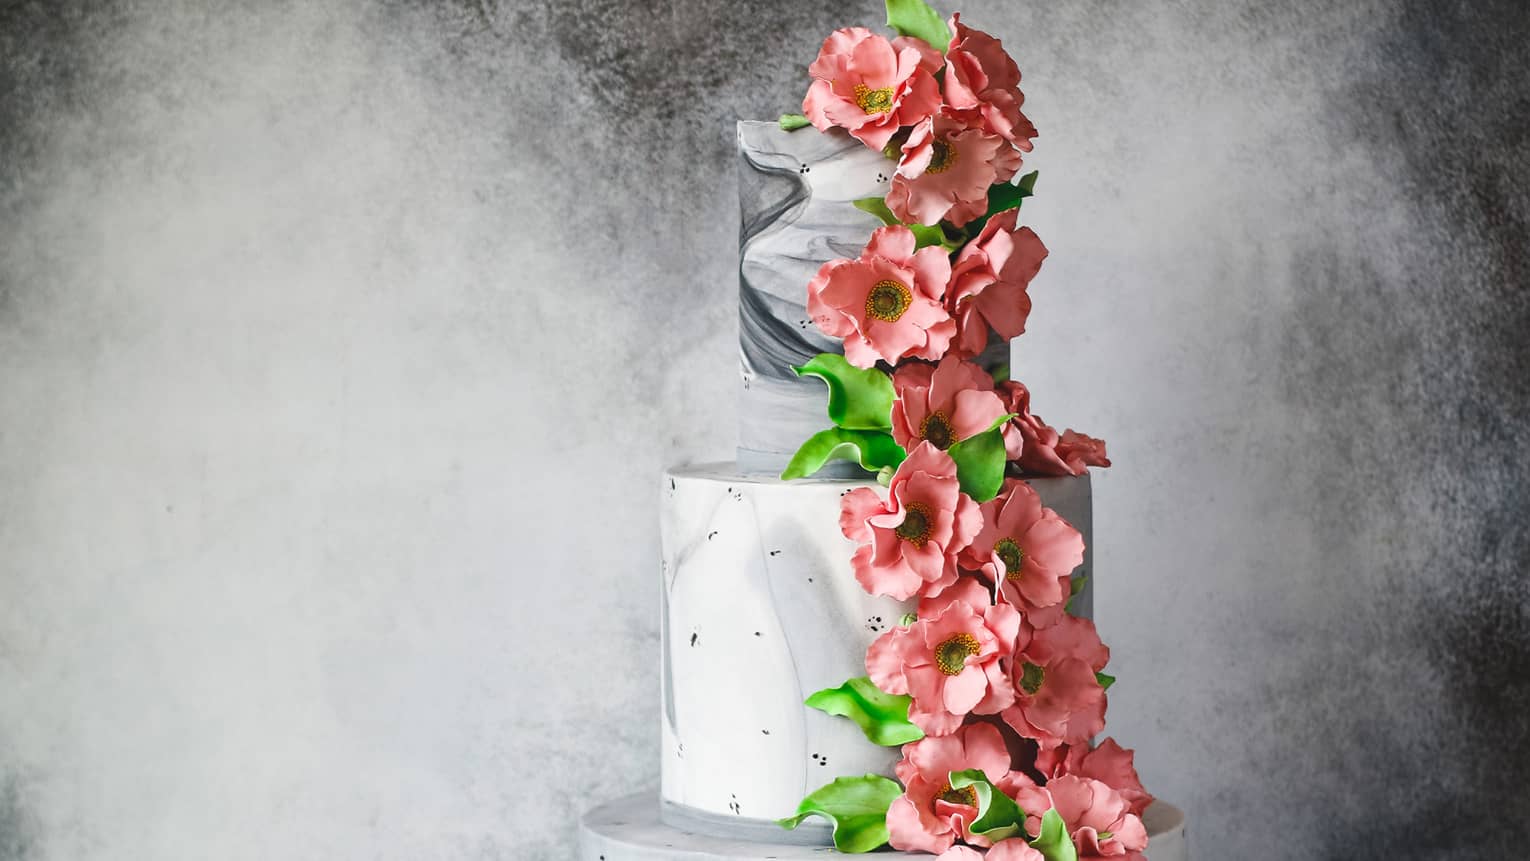 Three tiered wedding cake with marble icing design, decorated with cascading pink flowers